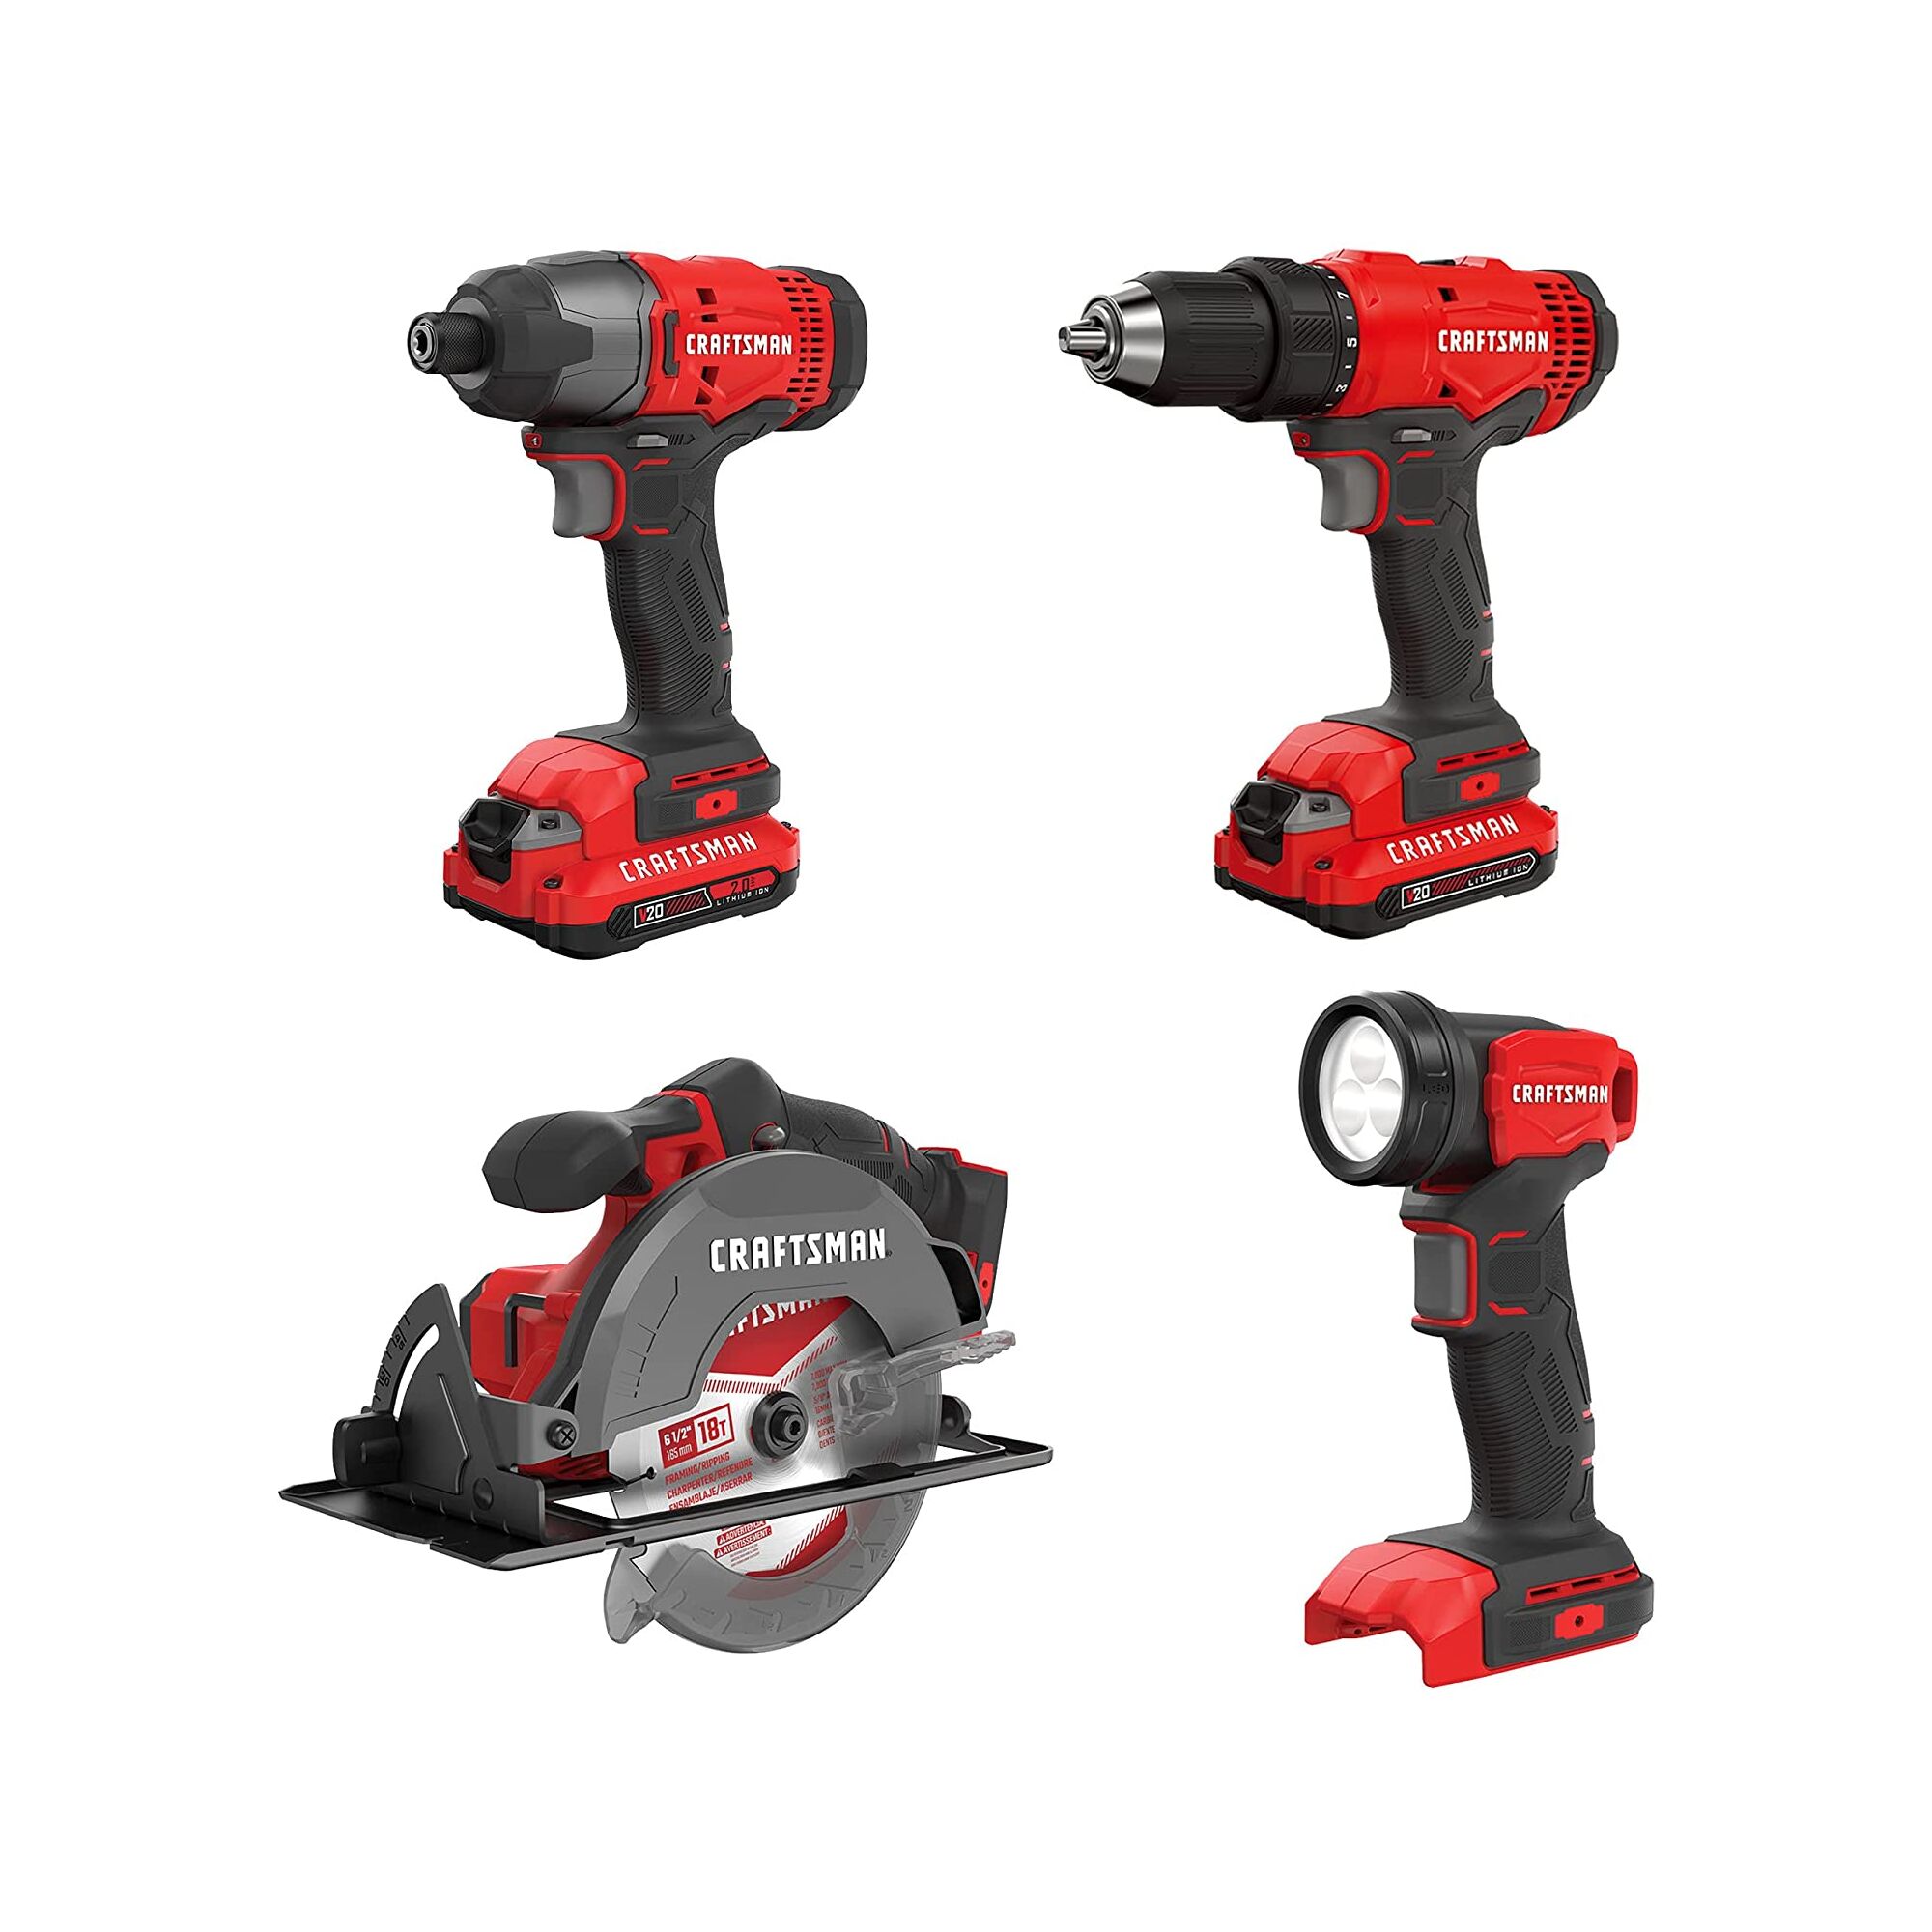 View of CRAFTSMAN Combo Kits: Power Tools and additional tools in the kit